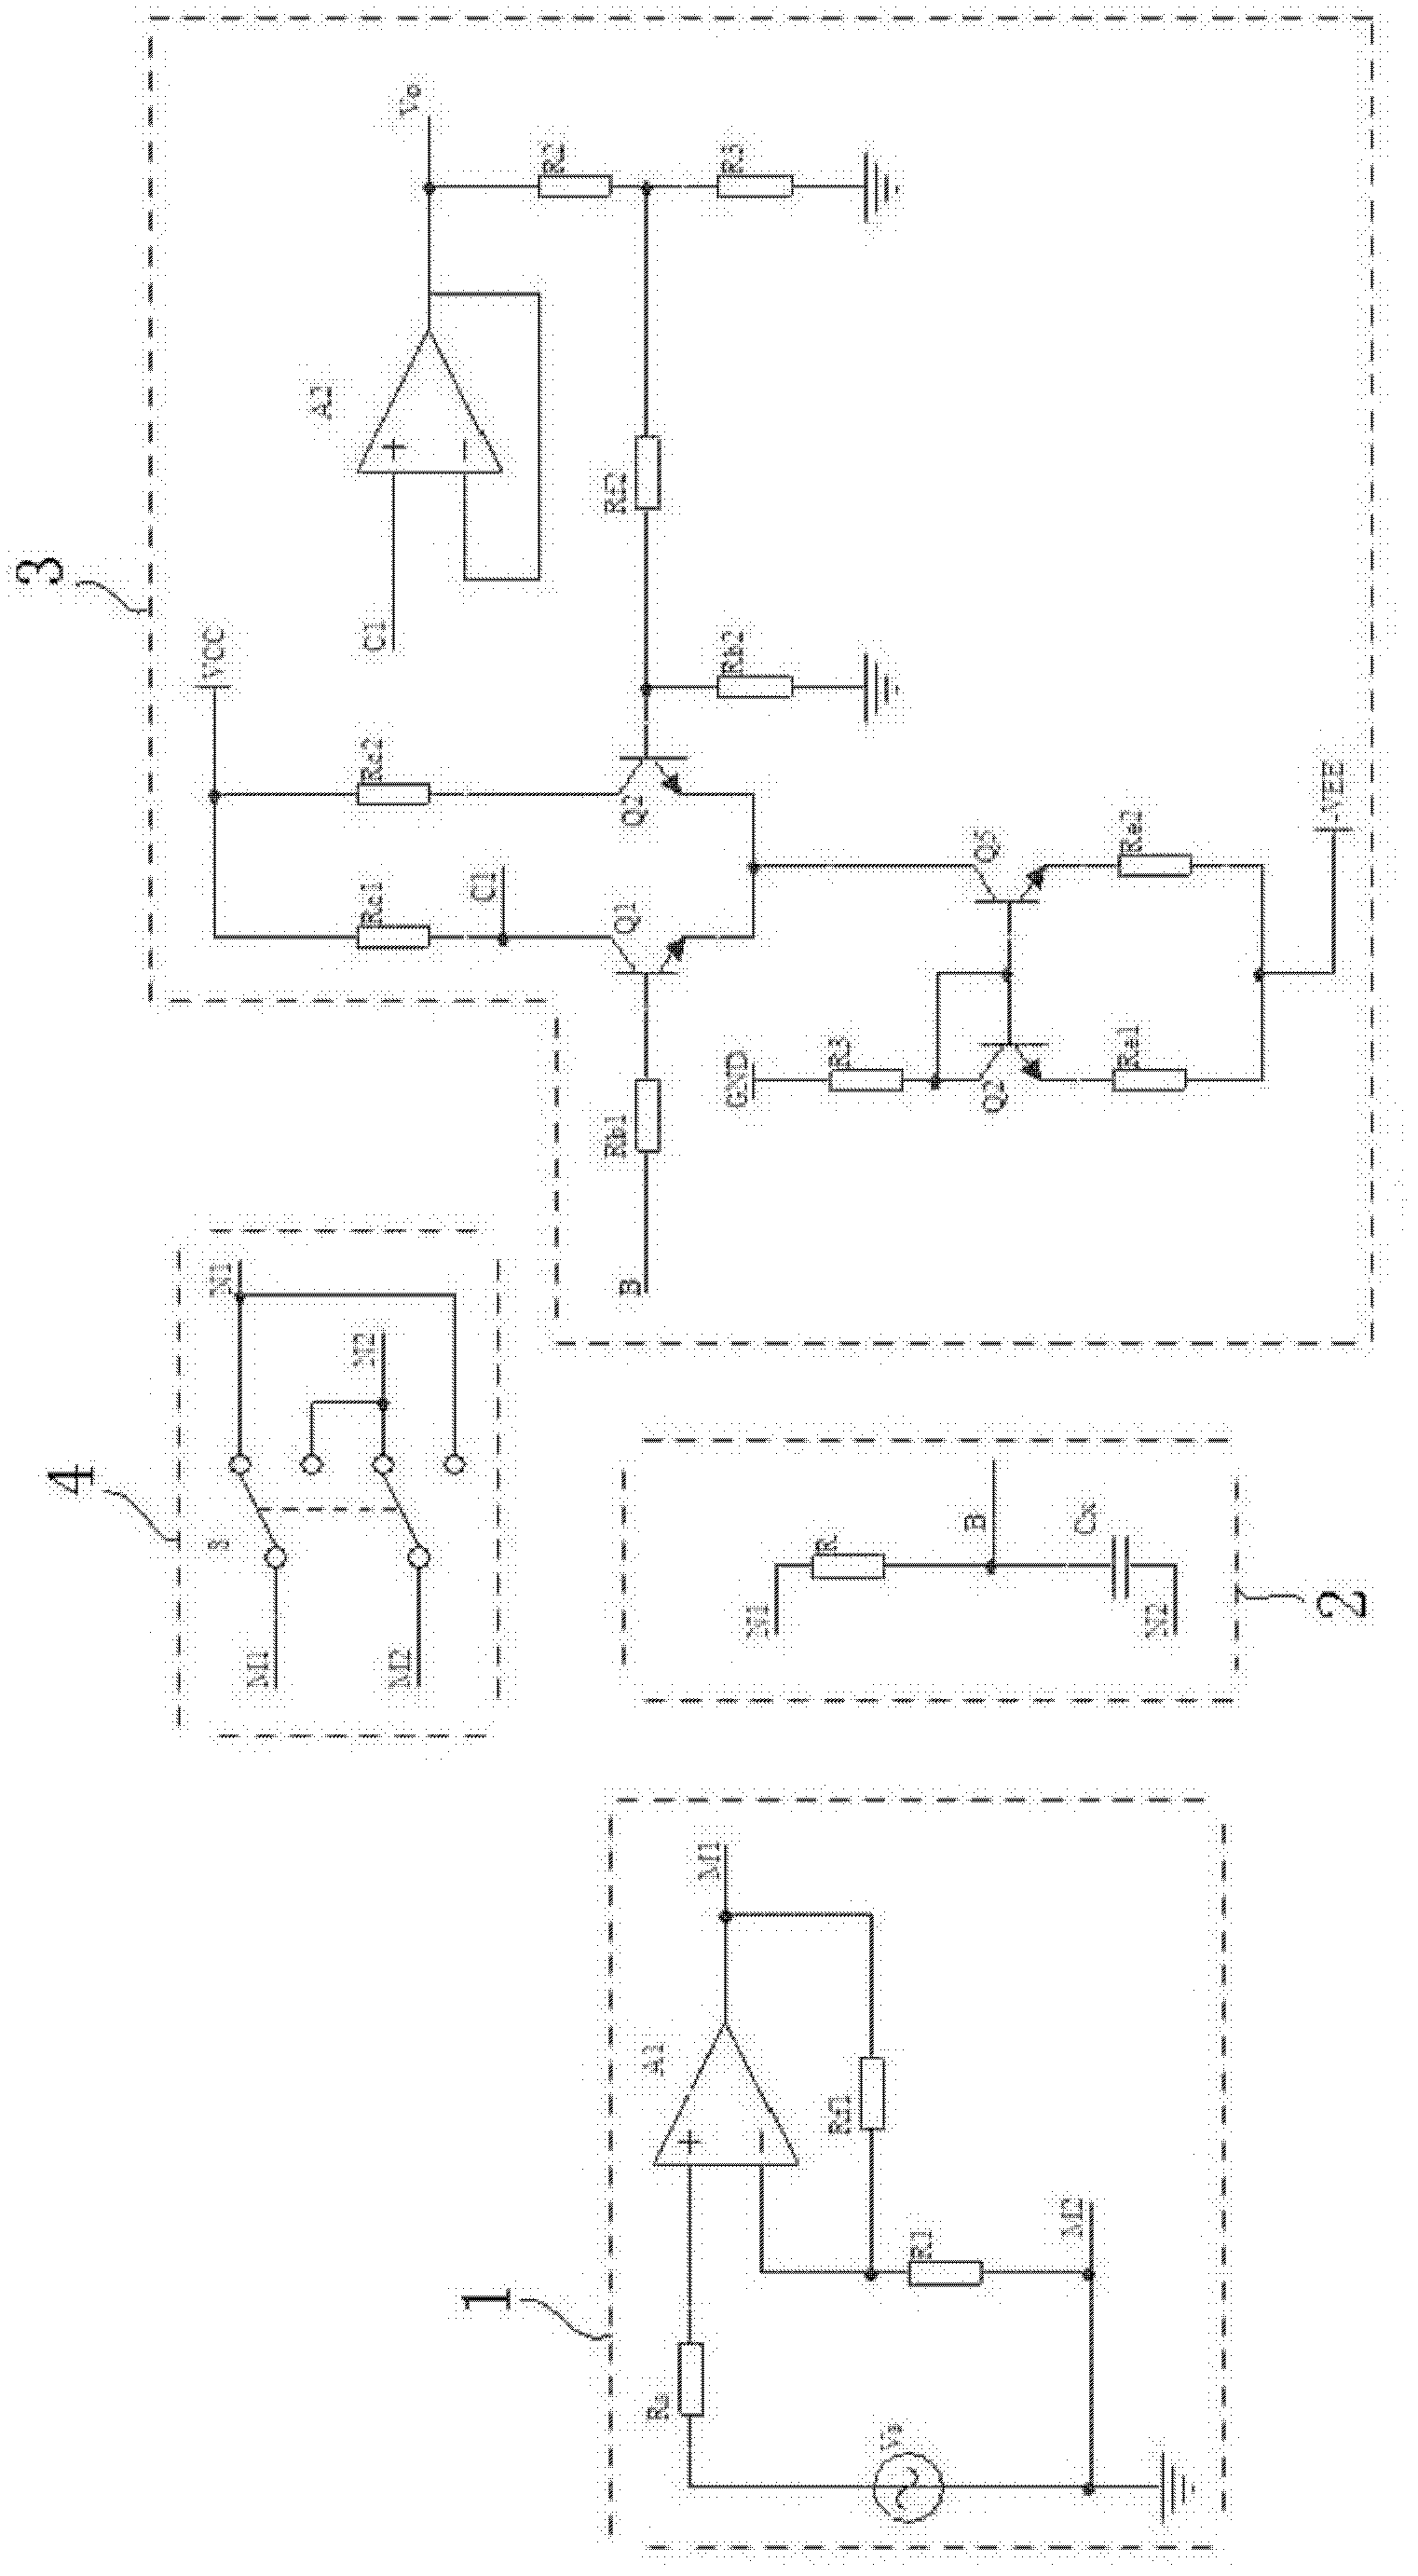 Small capacitance measurement circuit based on AC (alternating current) voltage drop balance and measurement method